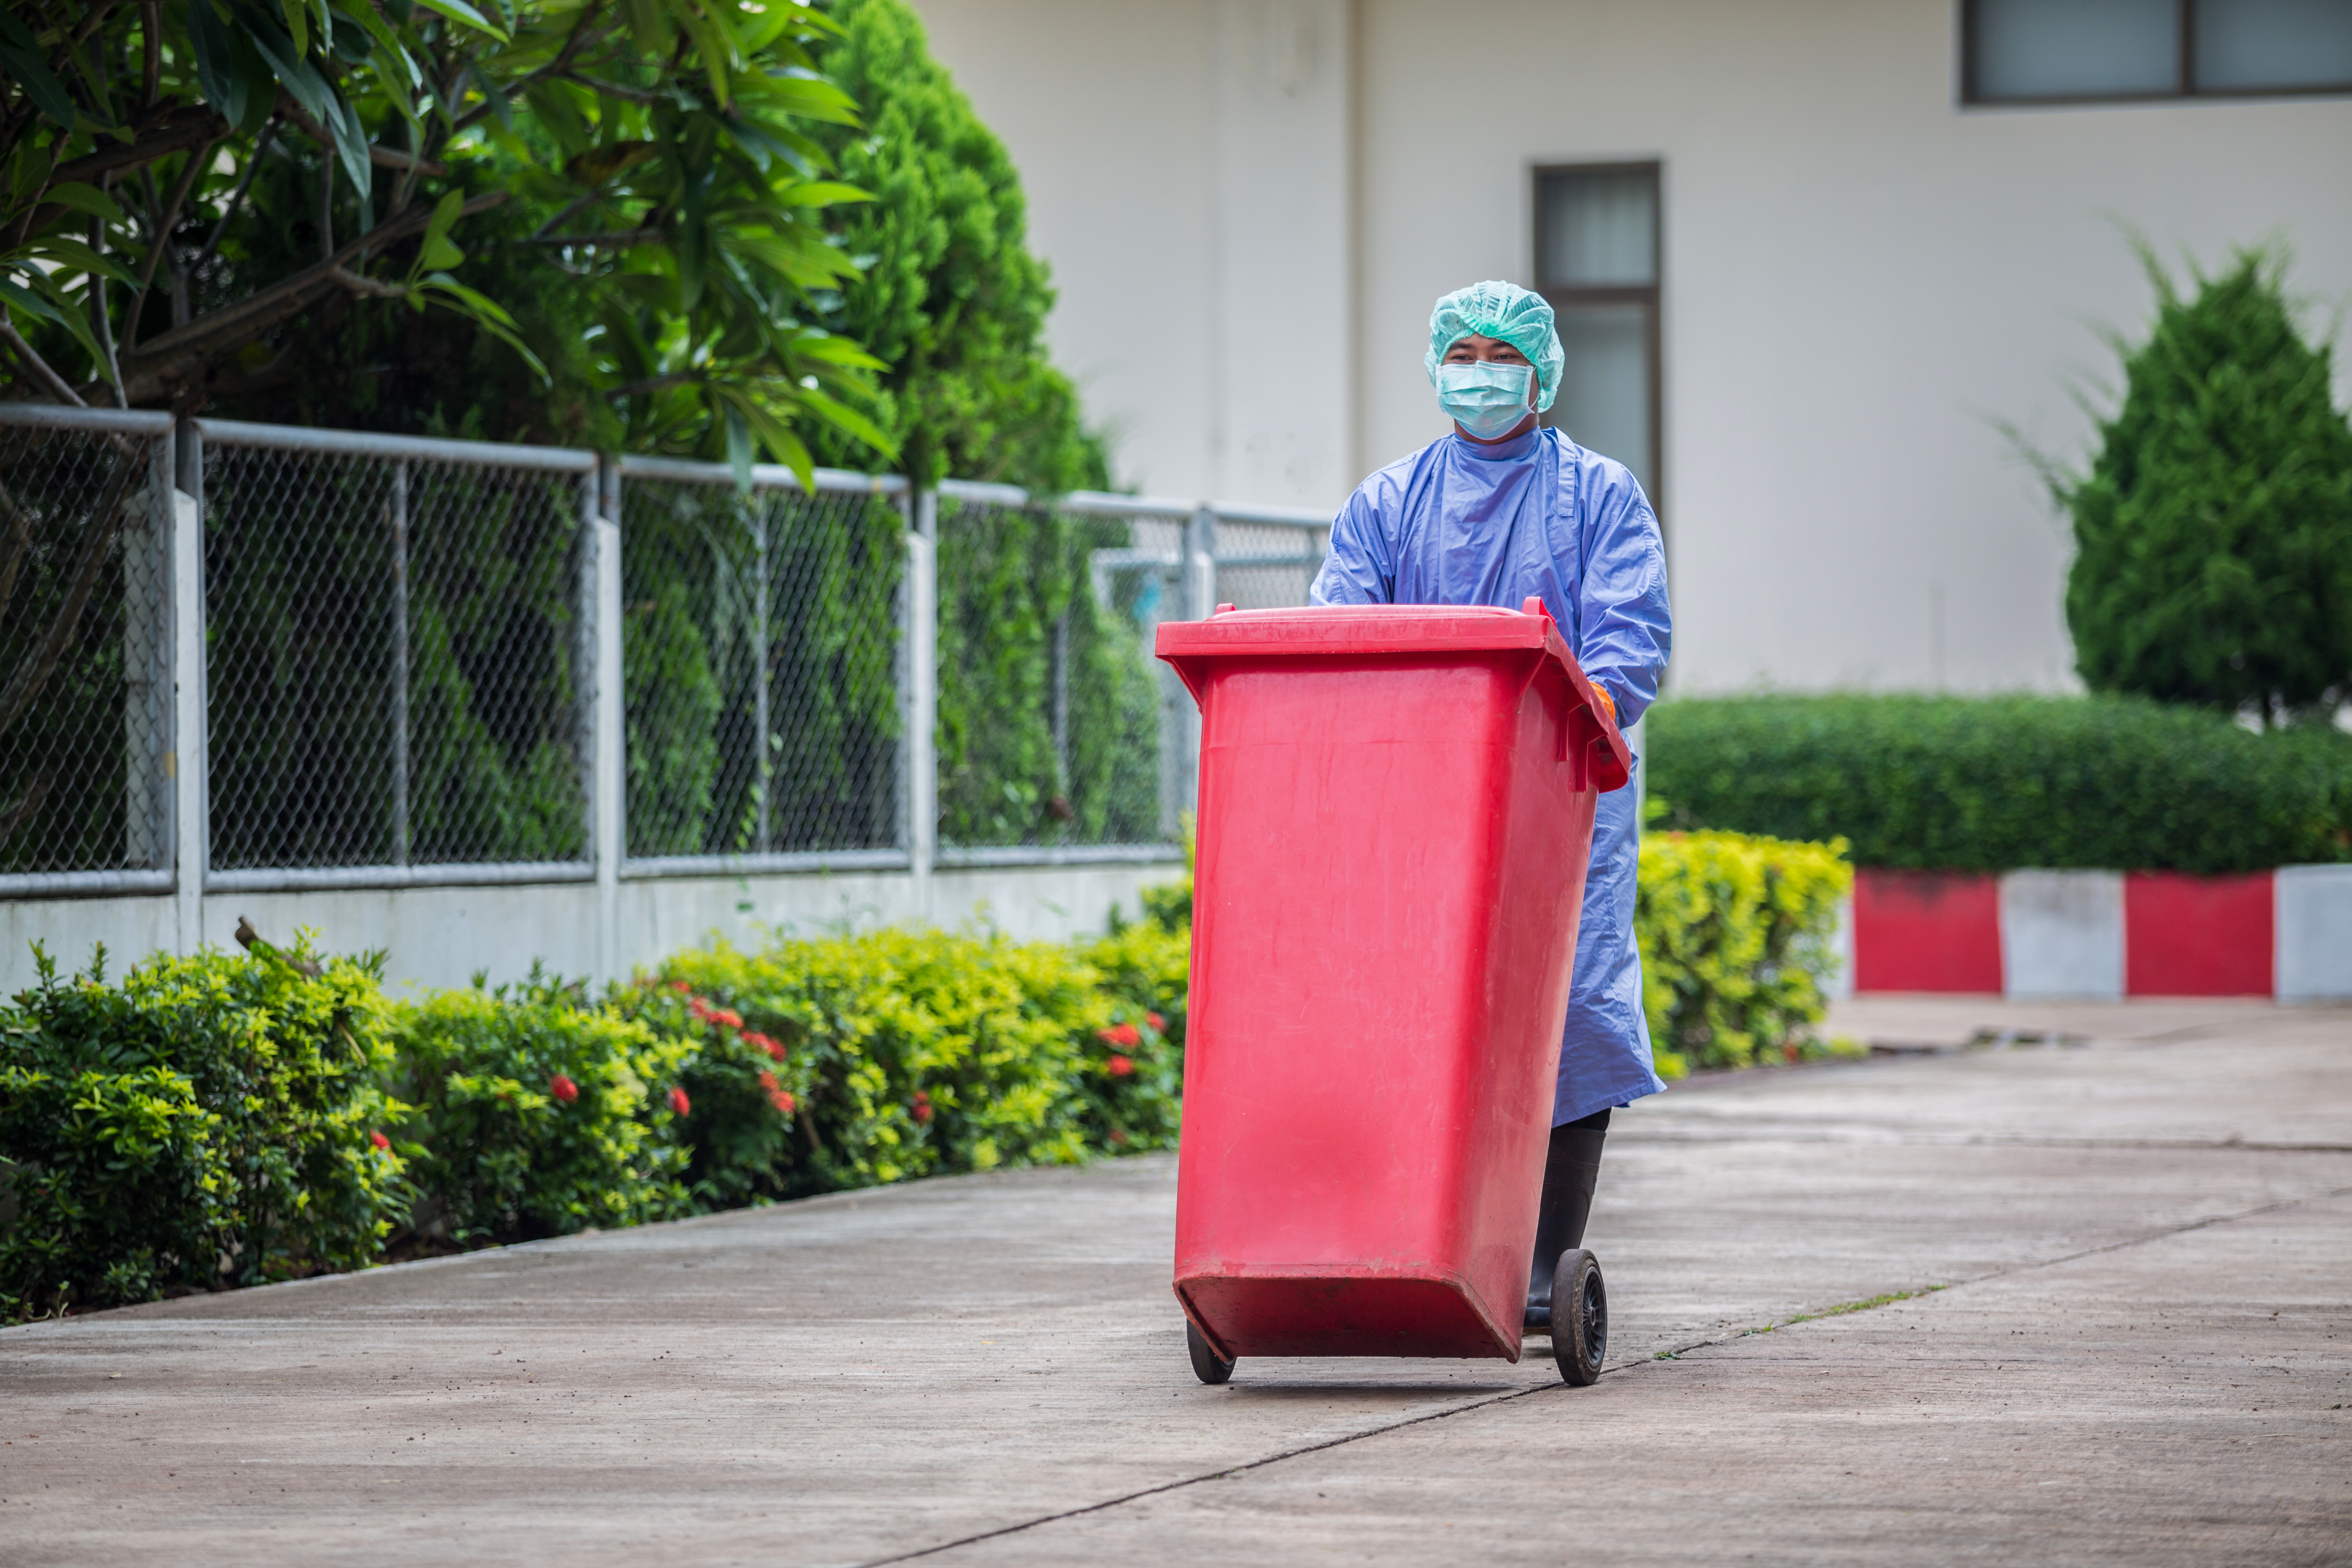 How Do You Properly Dispose of Biohazard Waste?